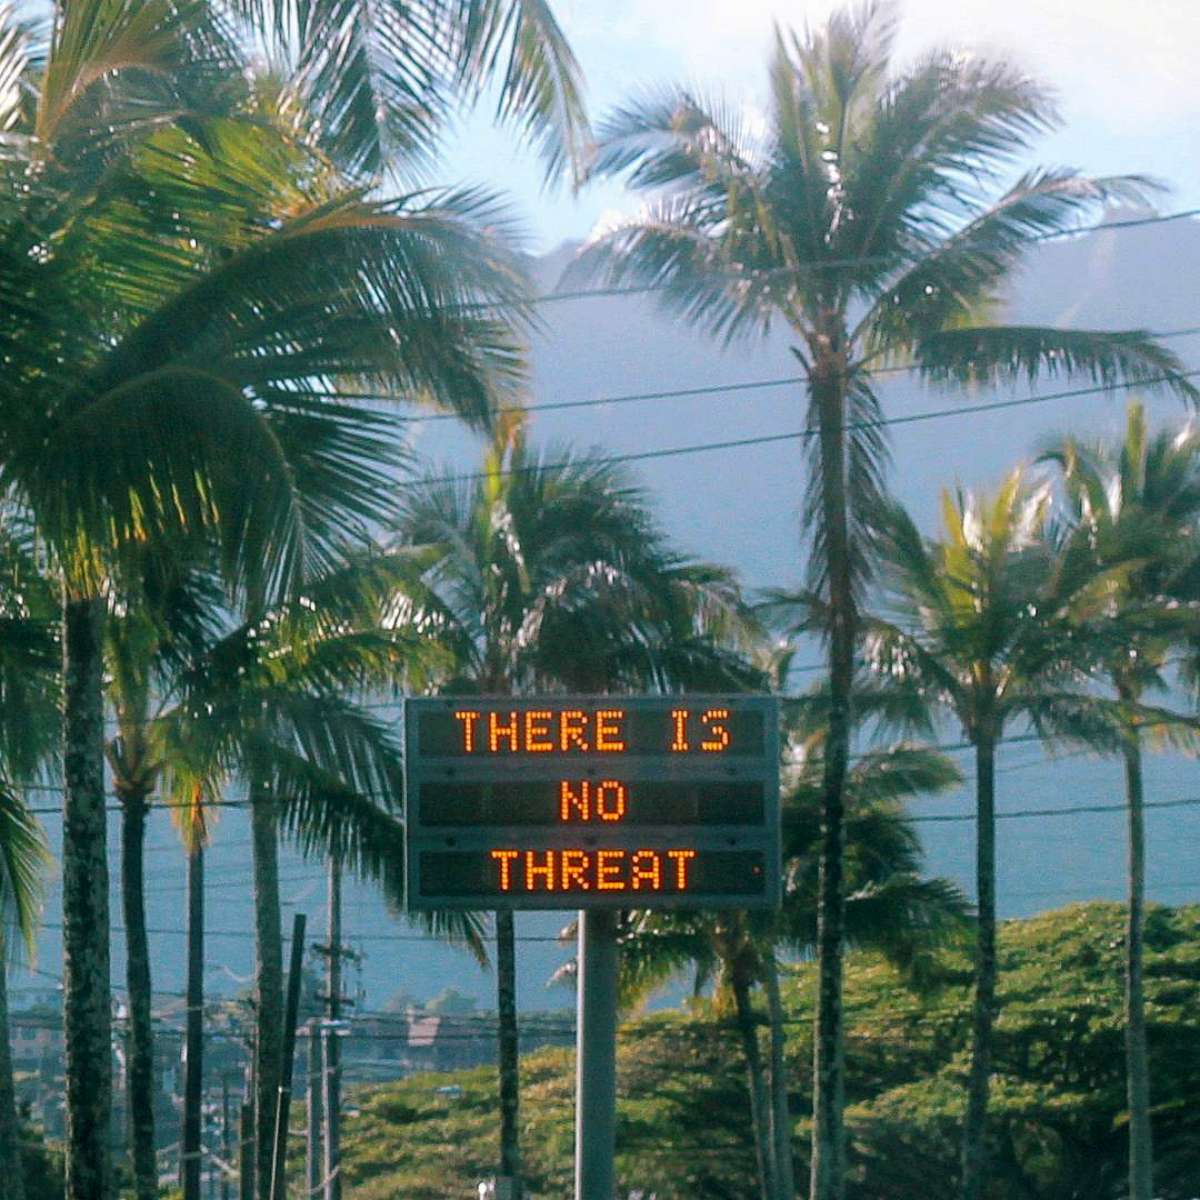 PHOTO: An electronic sign reads "There is no threat" in Oahu, Hawaii, after a false emergency alert that said a ballistic missile was headed for Hawaii, in this Jan. 13, 2018 photo obtained from social media.